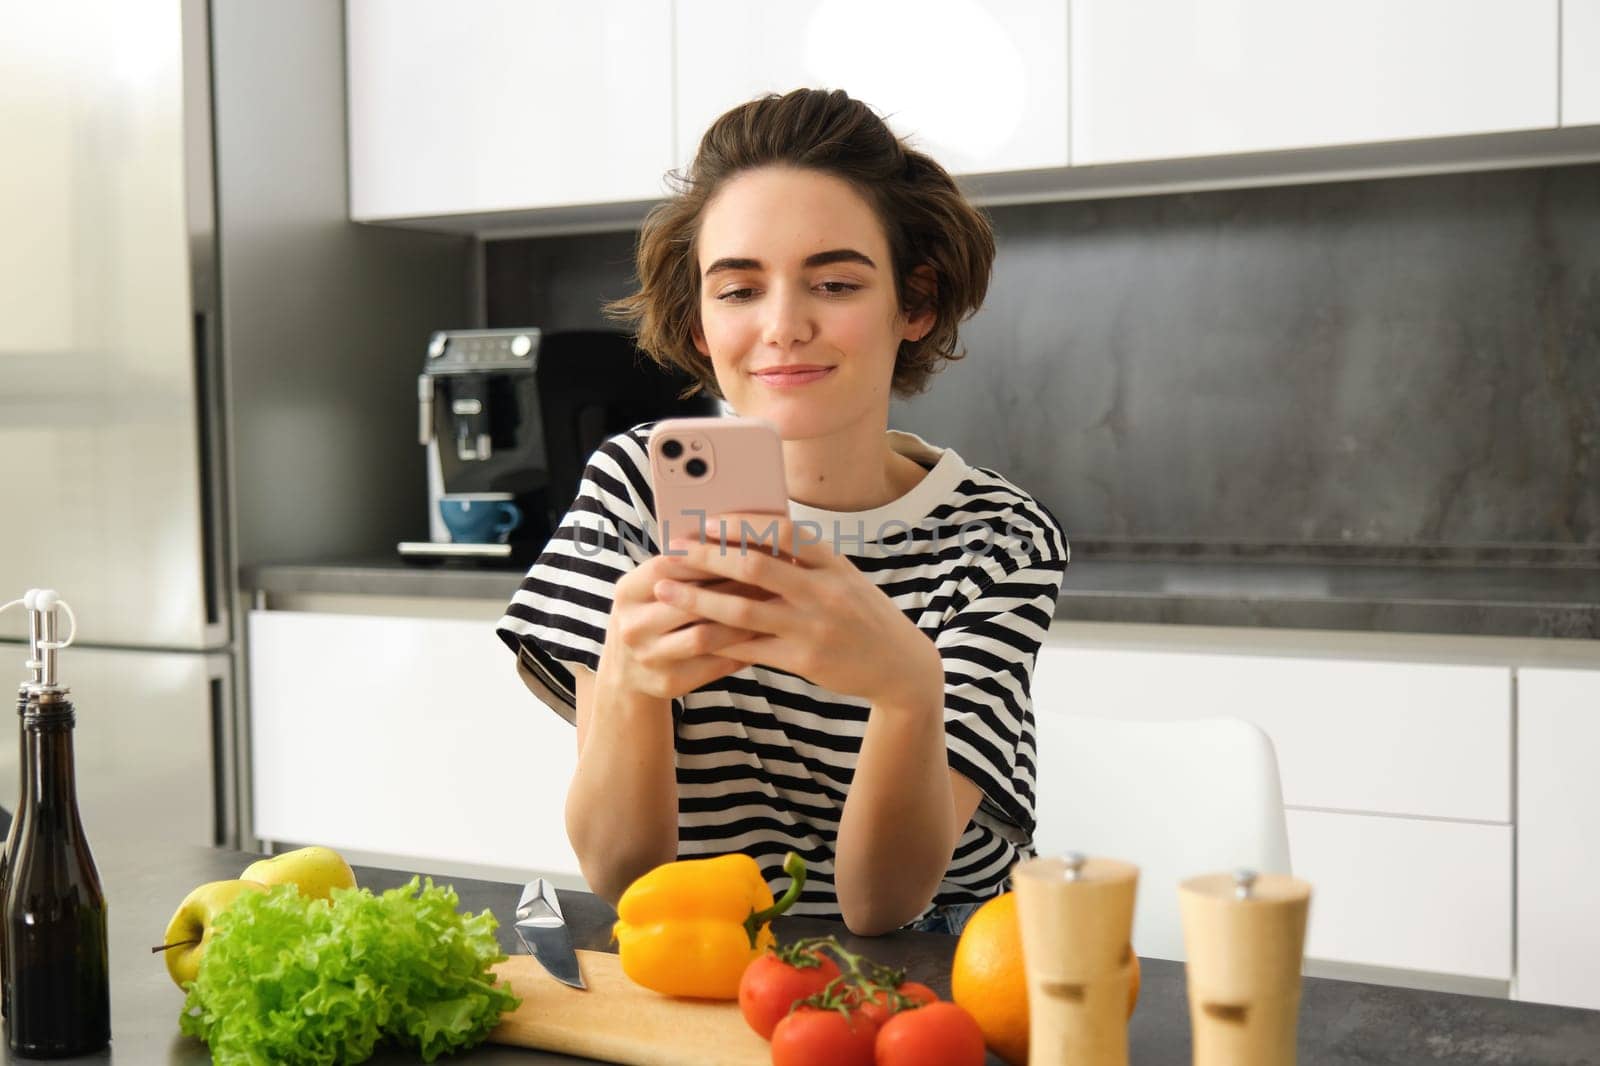 Portrait of smiling woman, holding smartphone, searching for healthy vegetarian recipe, standing near vegetables in the kitchen.